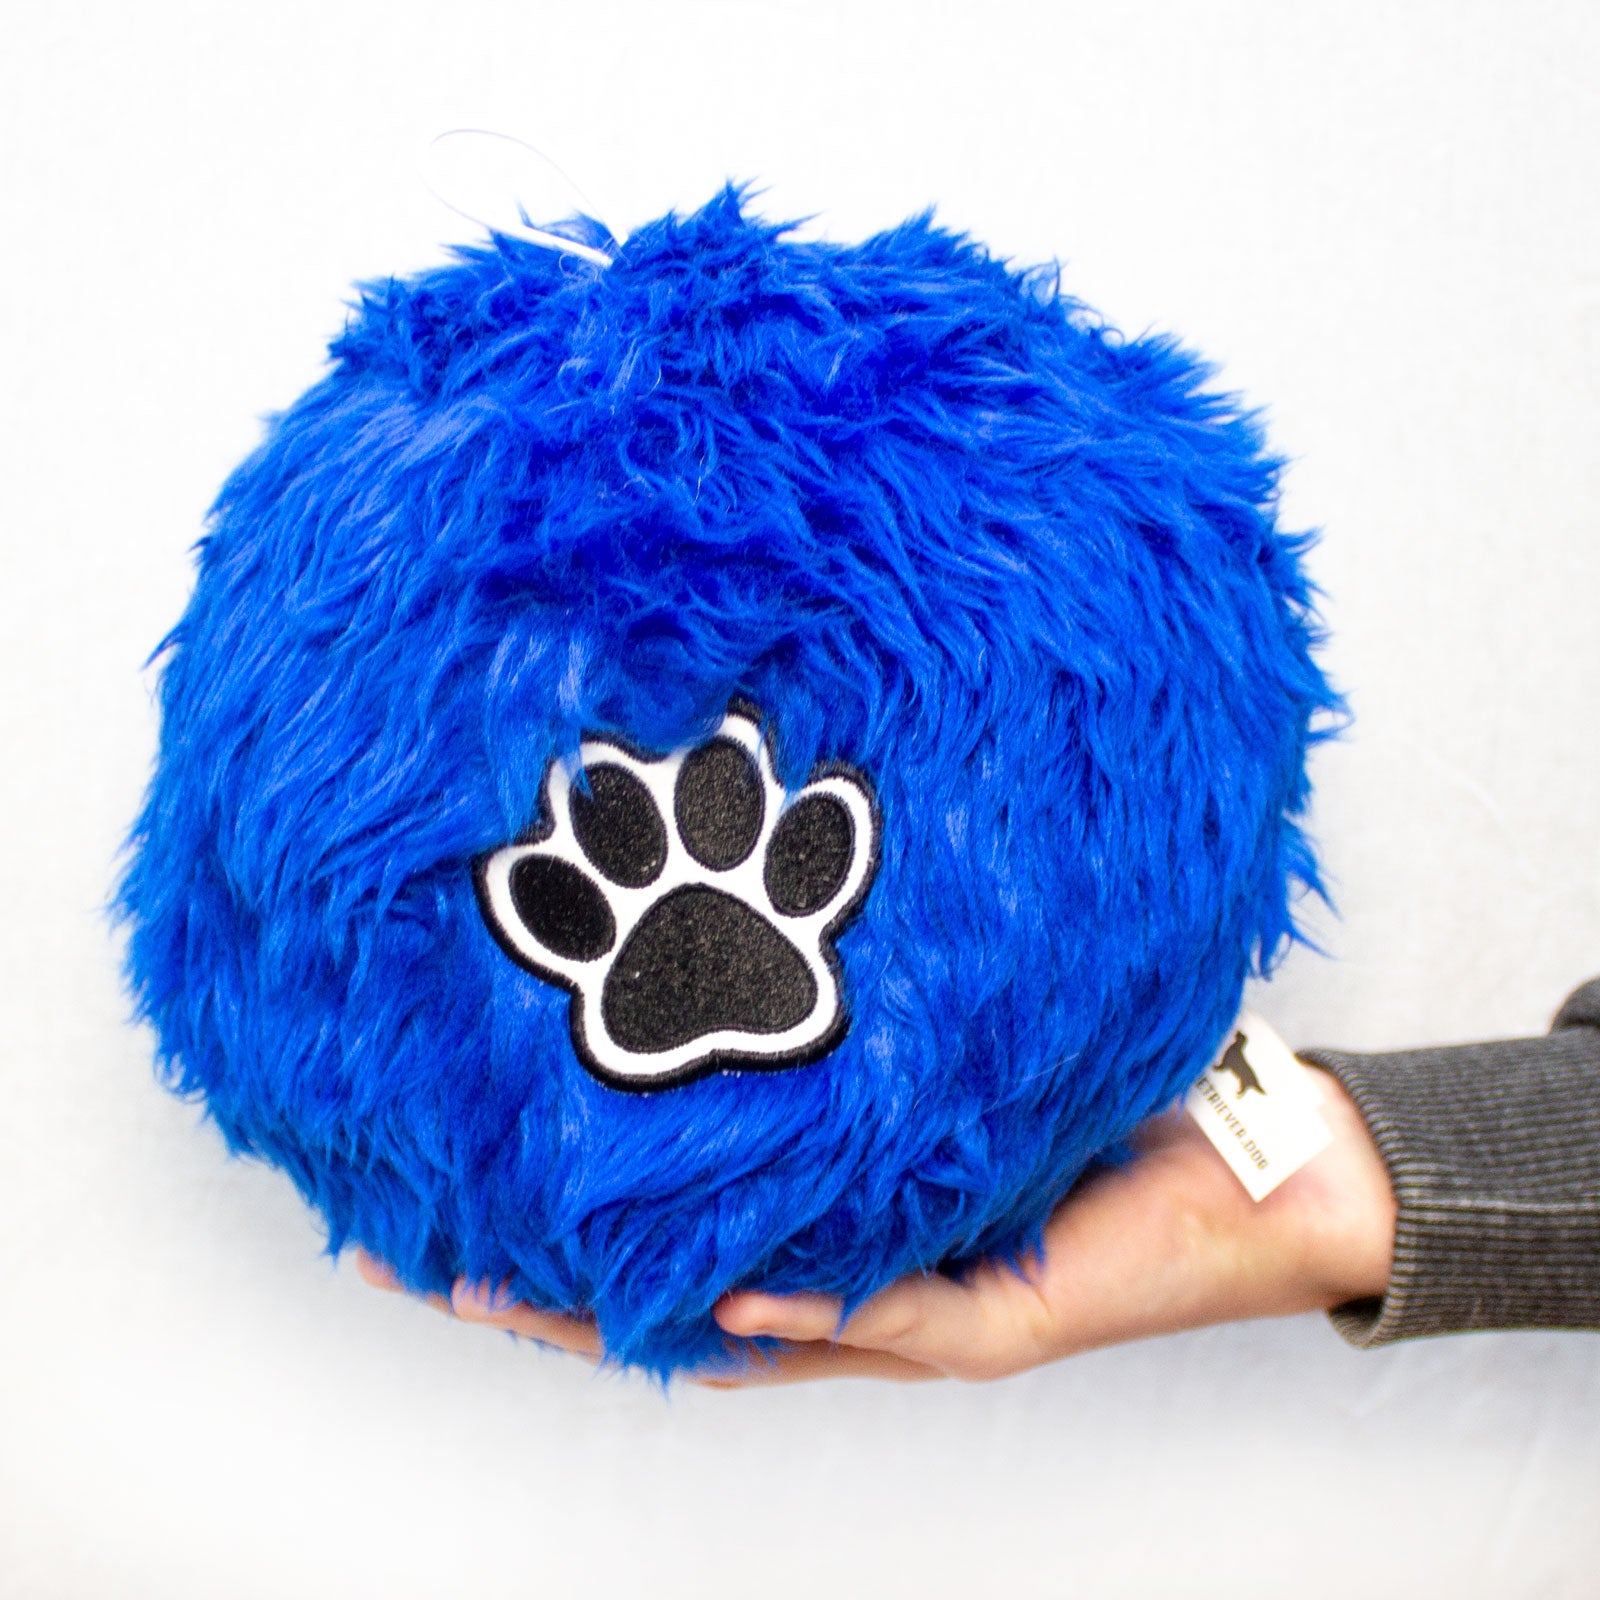 Soft Fluffy Ball For Leonberger Dogs - Large Size